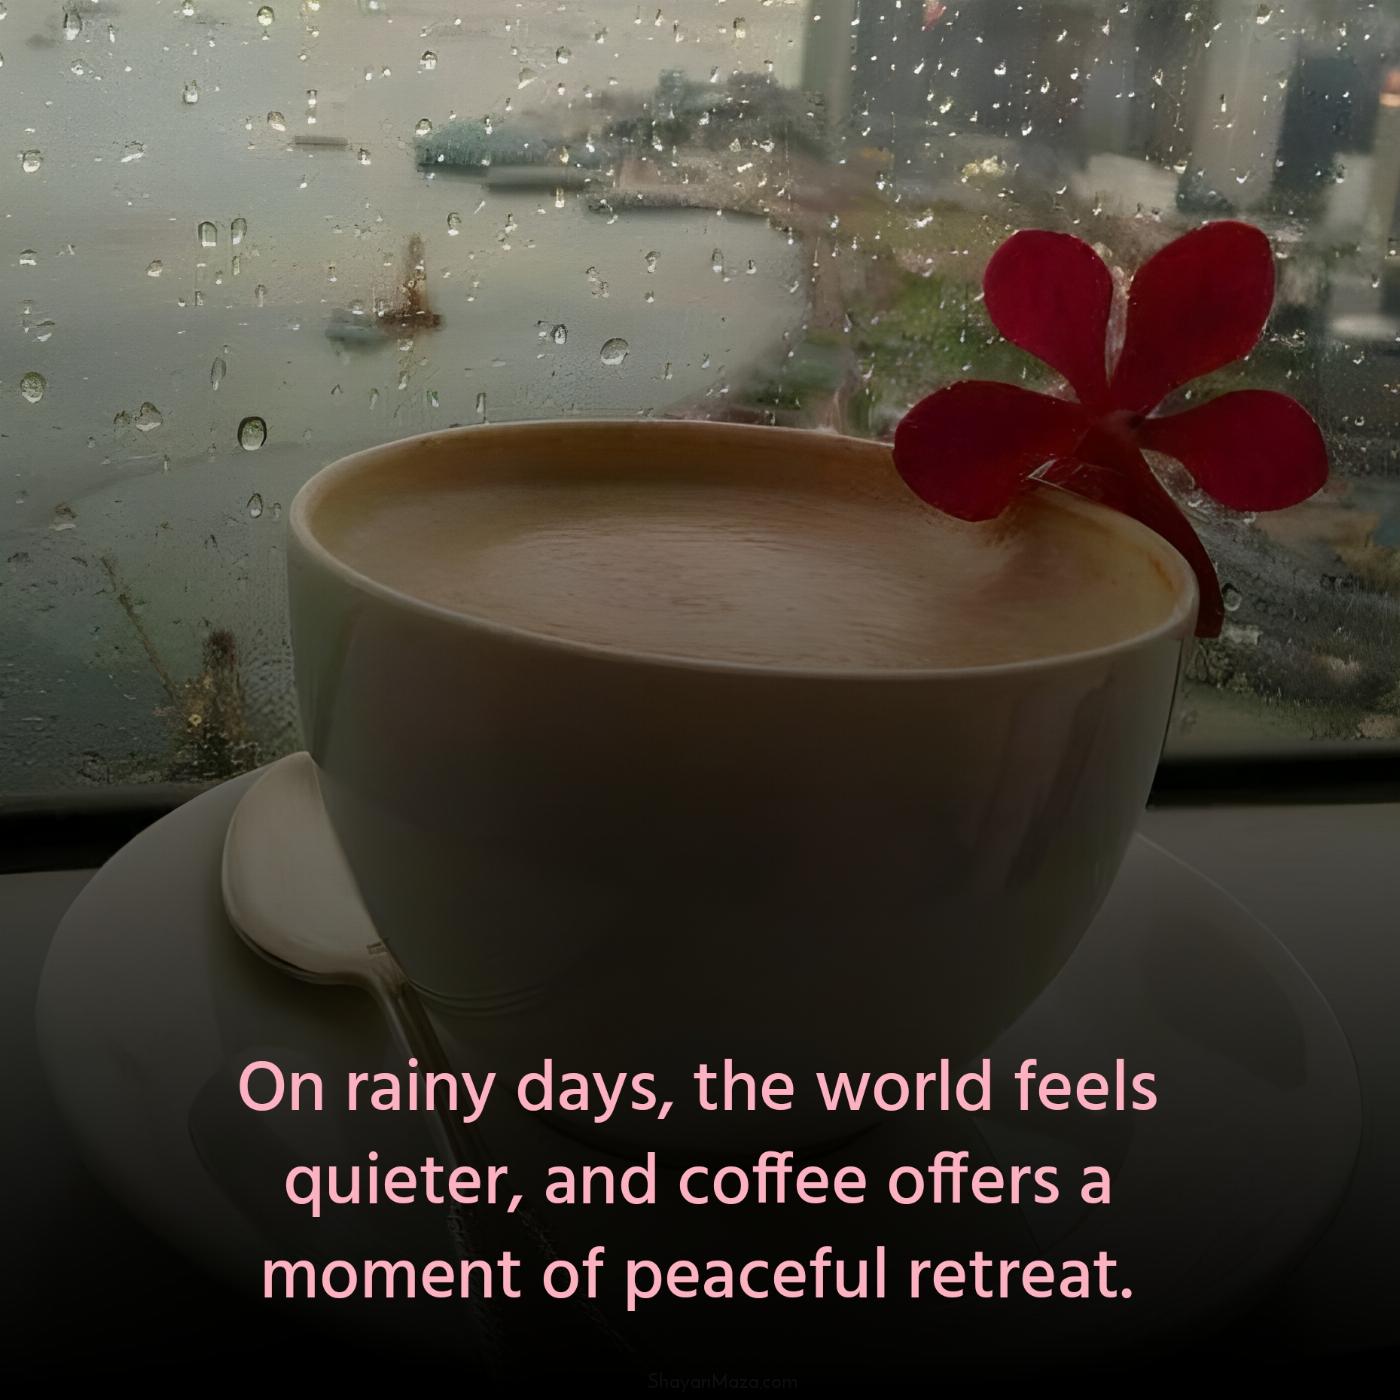 On rainy days the world feels quieter and coffee offers a moment